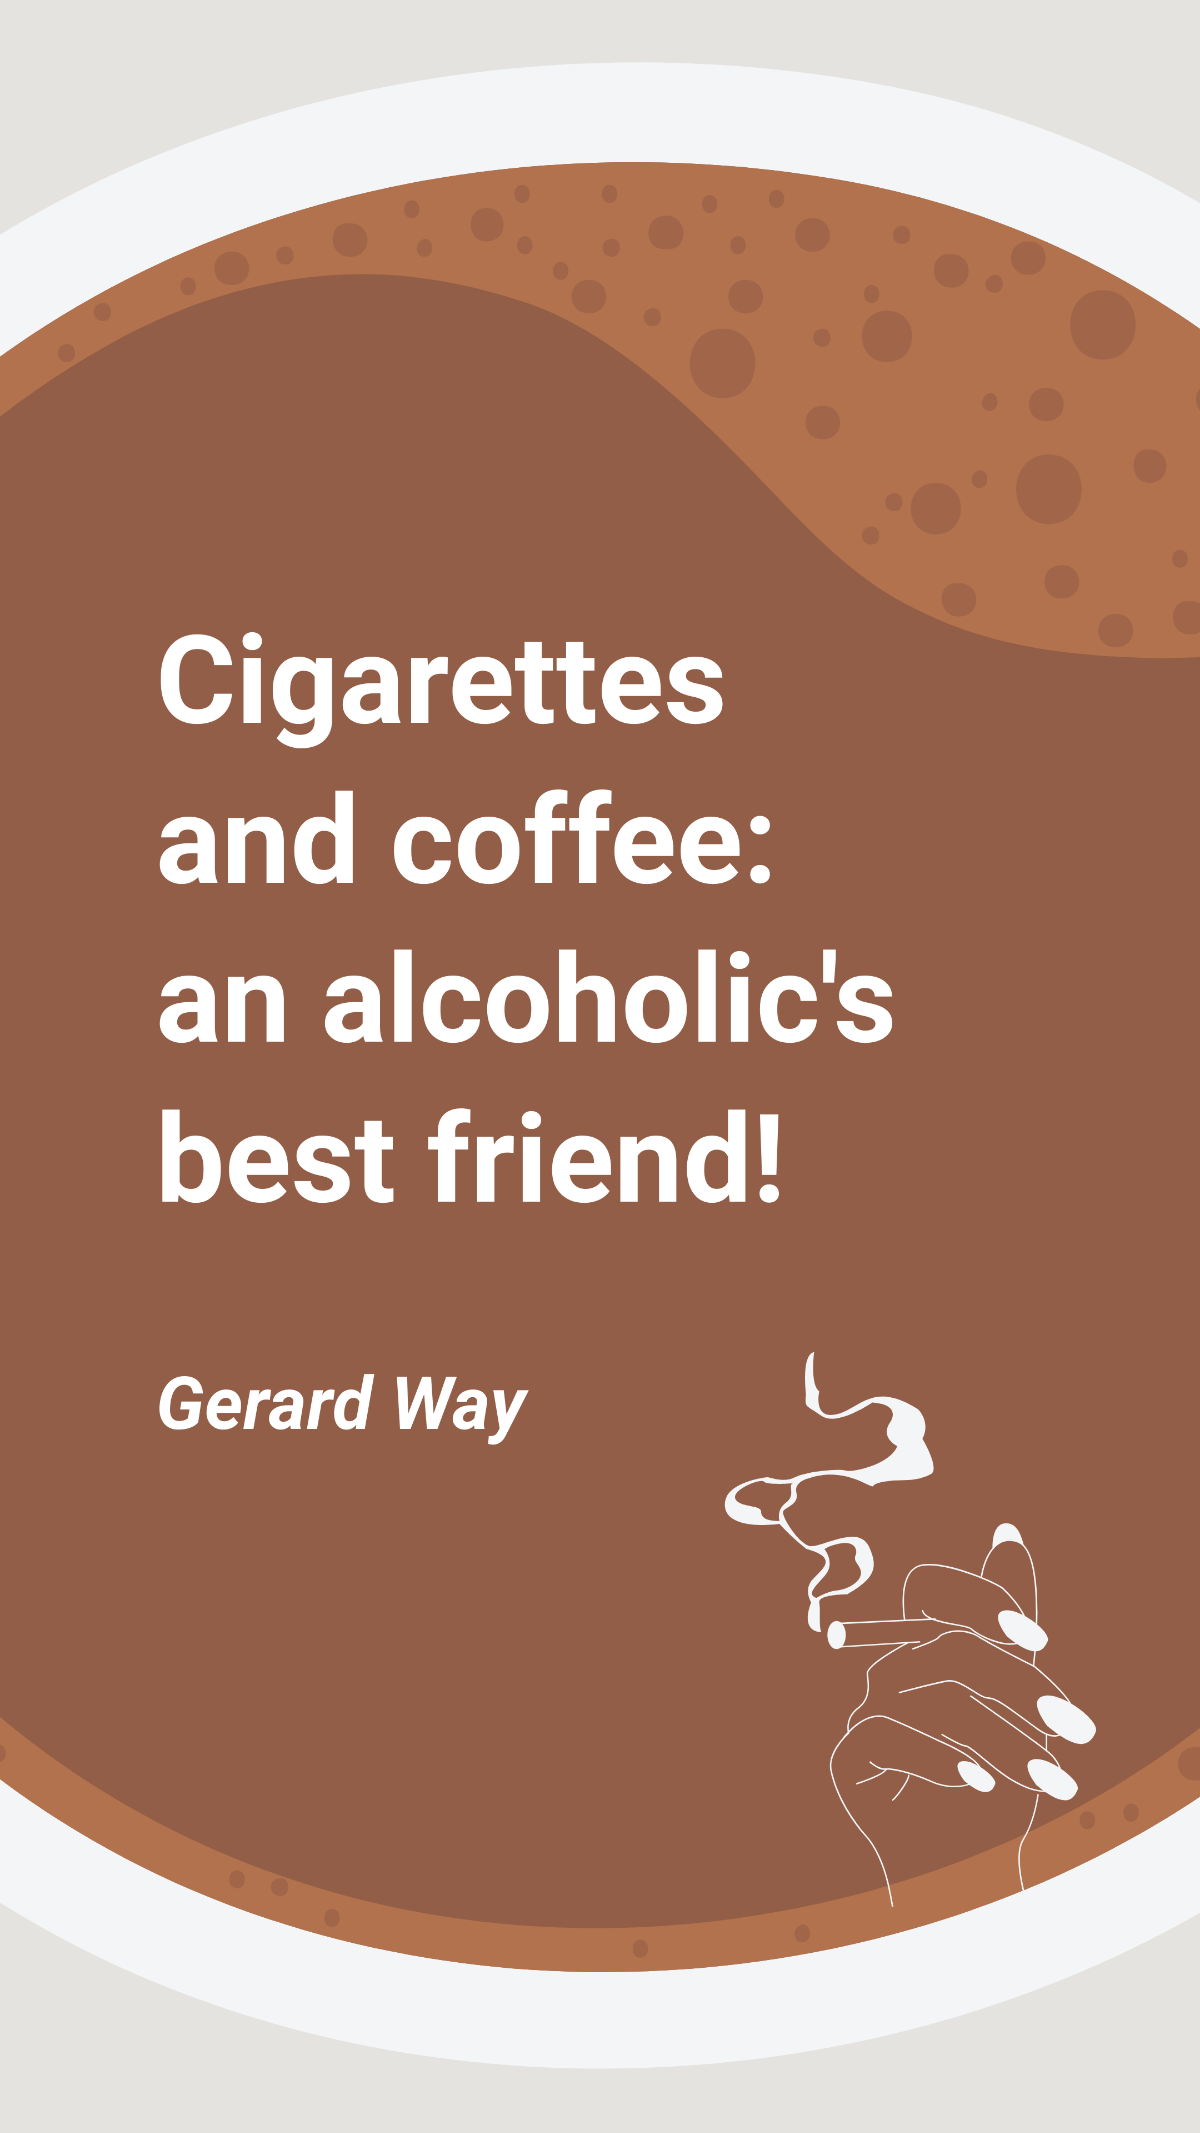 Free Gerard Way - Cigarettes and coffee: an alcoholic's best friend! Template